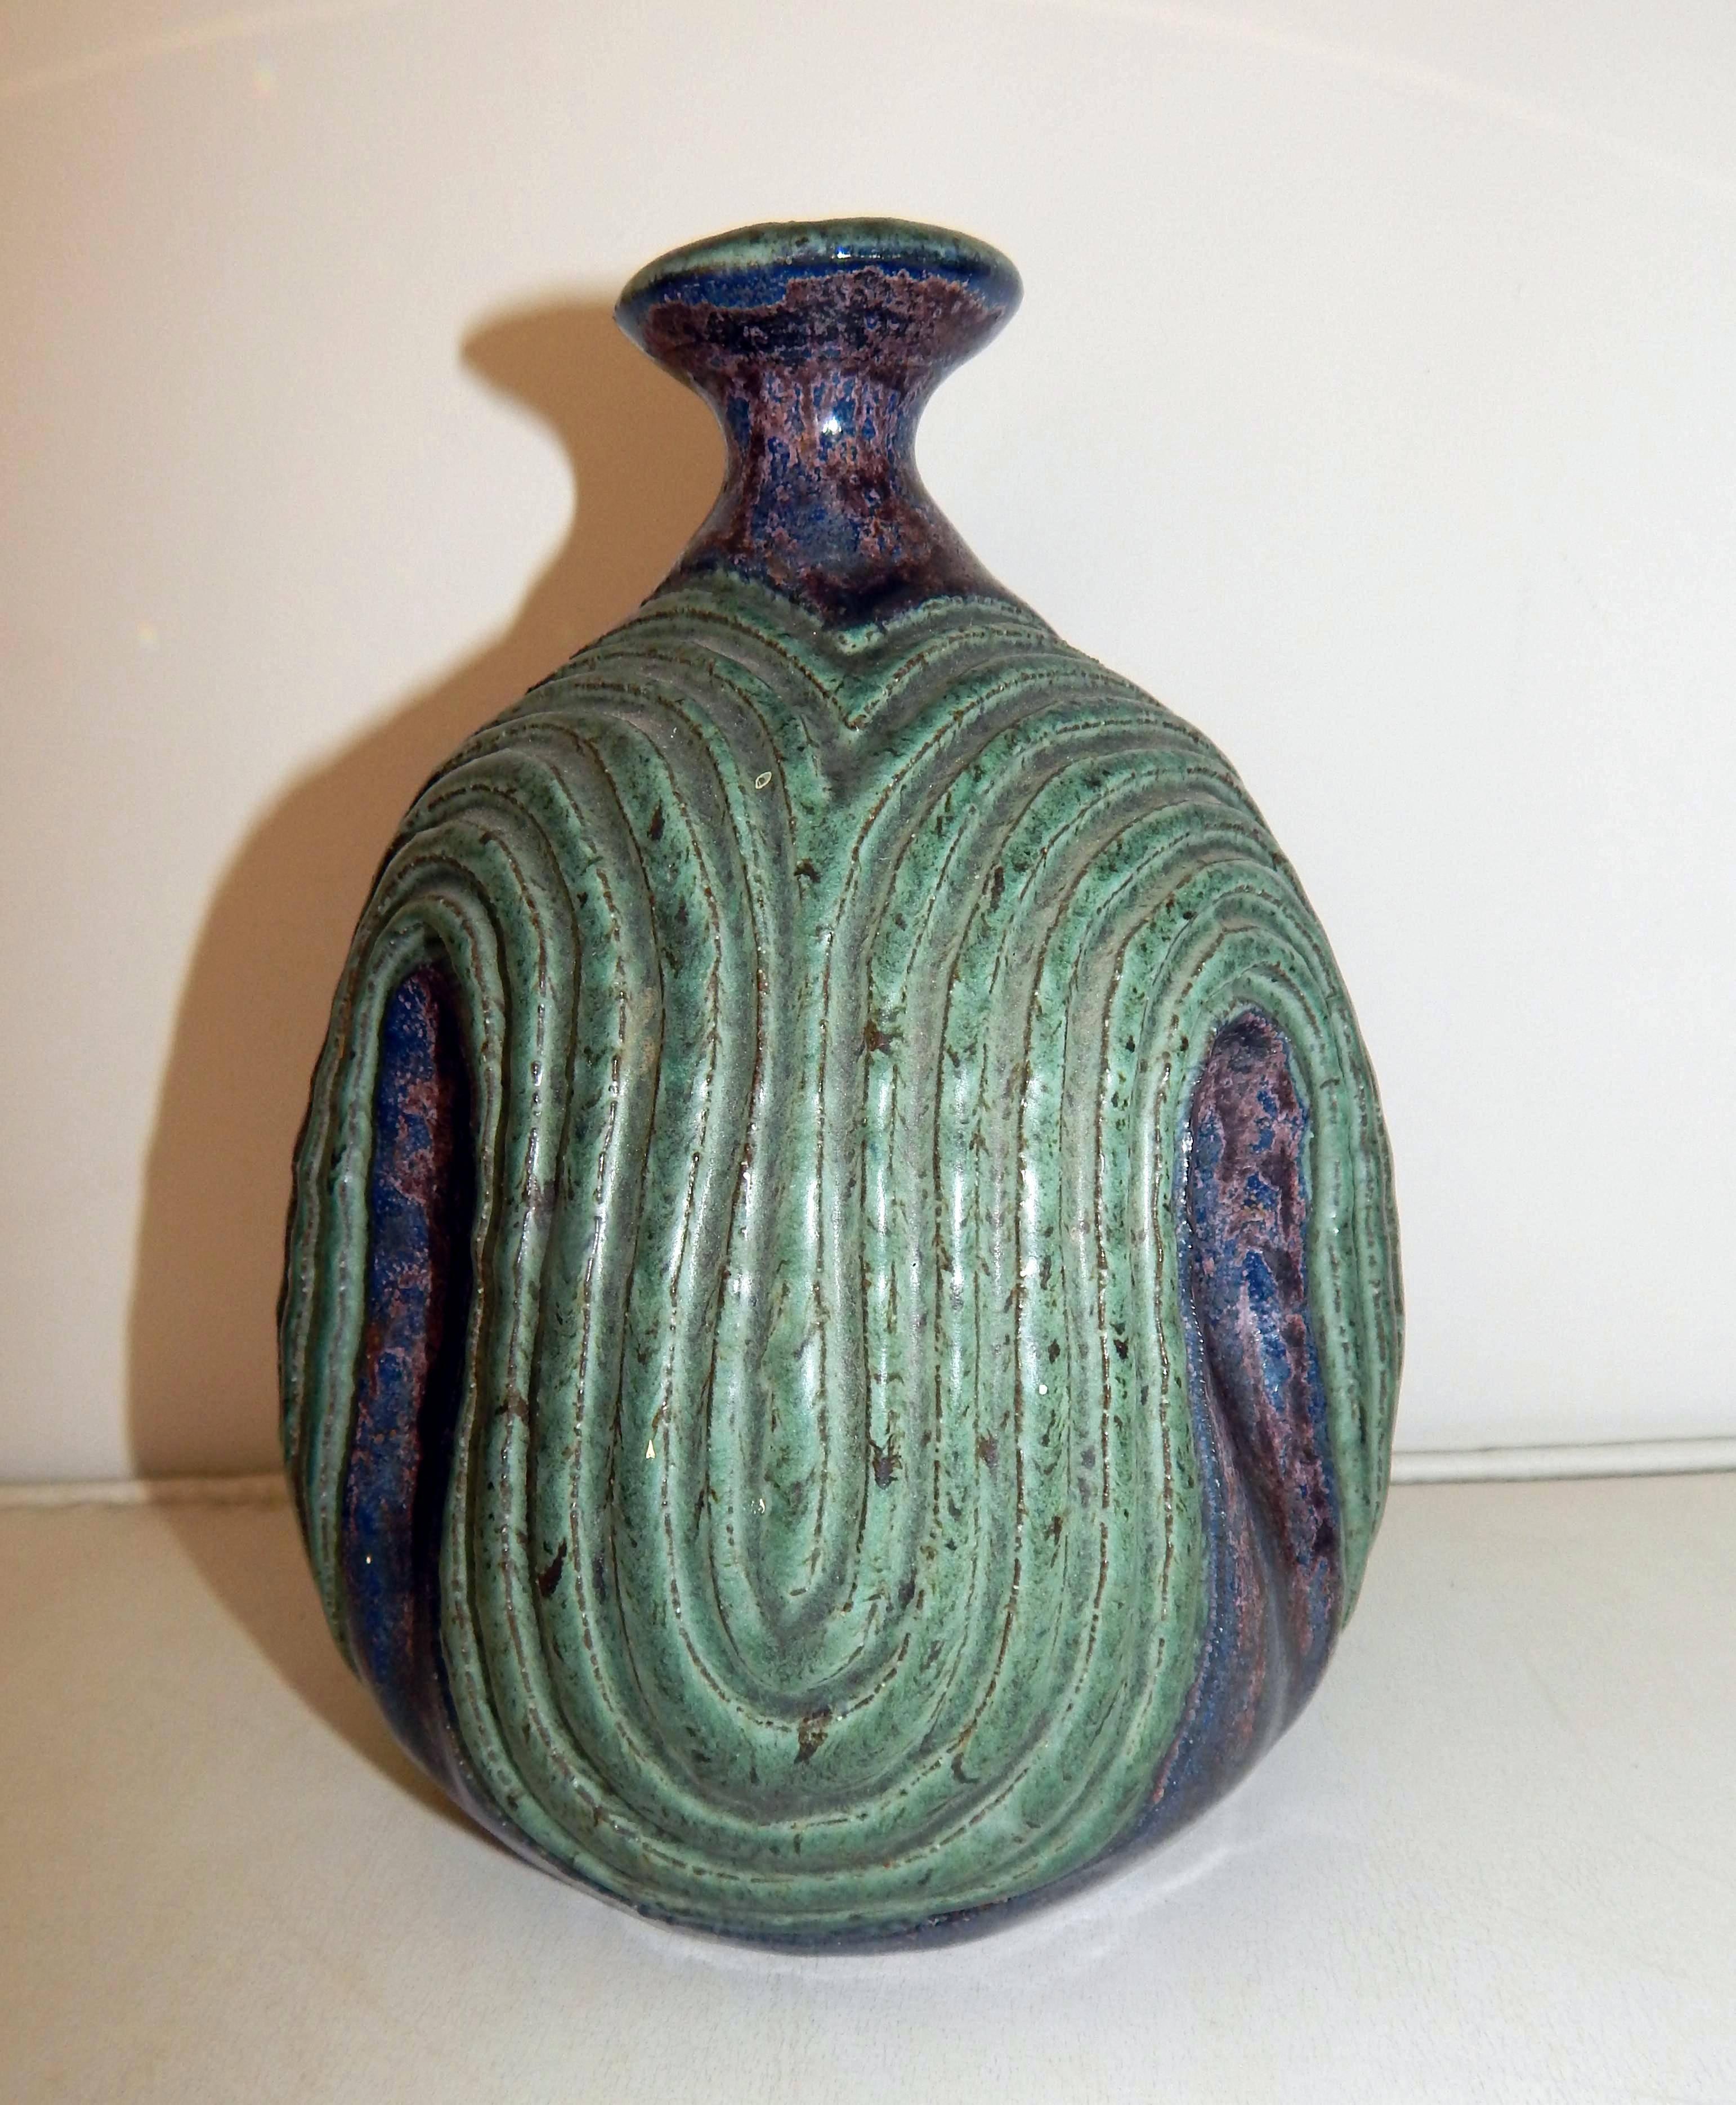 Green stoneware bottle with undulating carved design.
Underlying mauve and blue accents.
Marked on the base: MKG.
By well-known designer and craftsman, Maurice K. Grossman
from Arizona where he taught at the University of Arizona, Tucson for